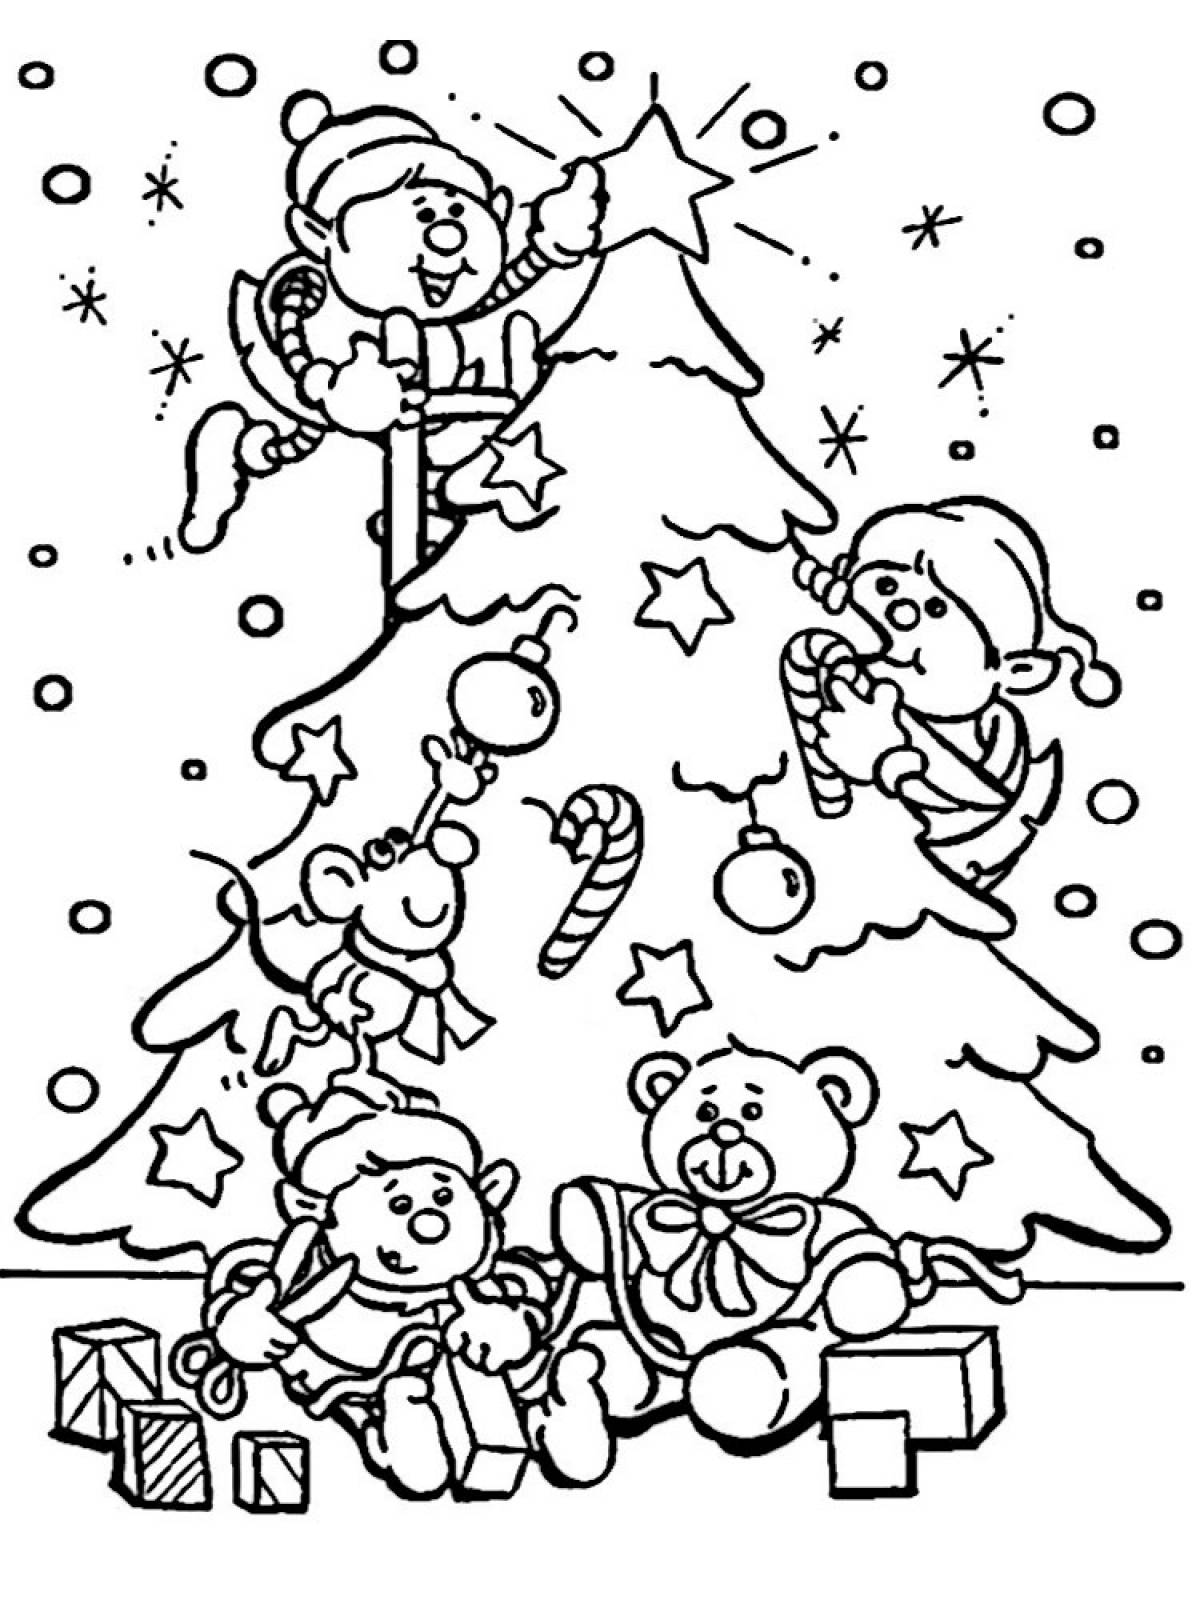 Coloring pages for 6 years old